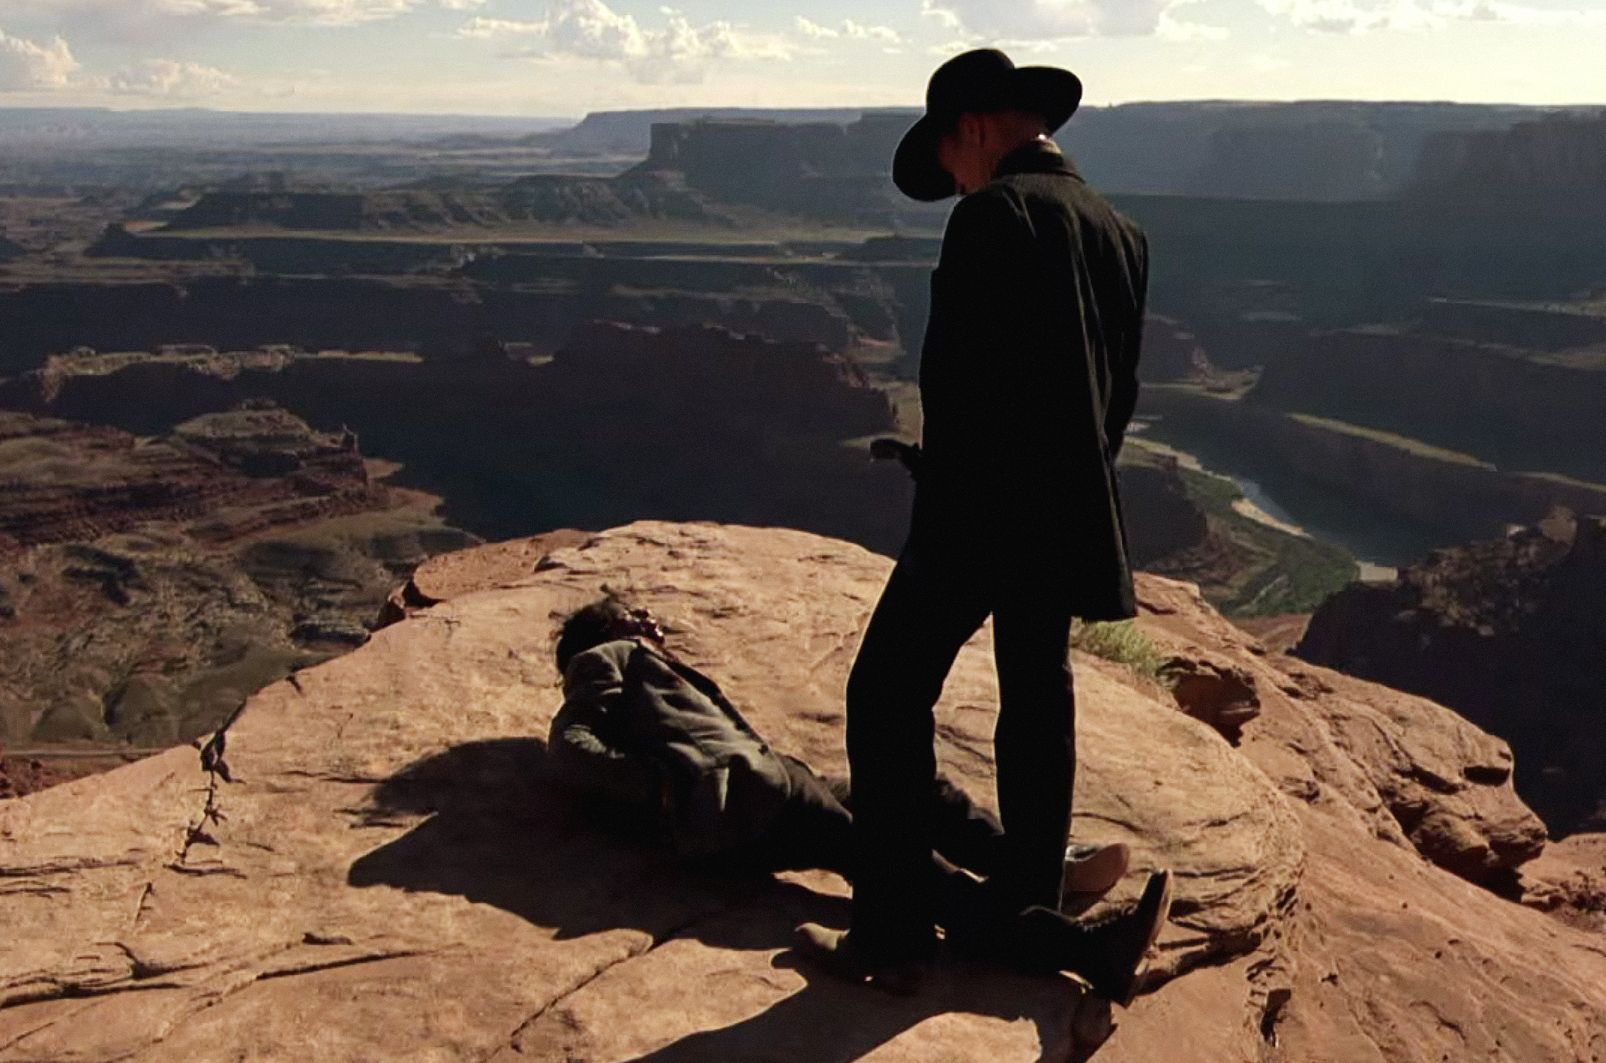 Still from the teaser for Westworld